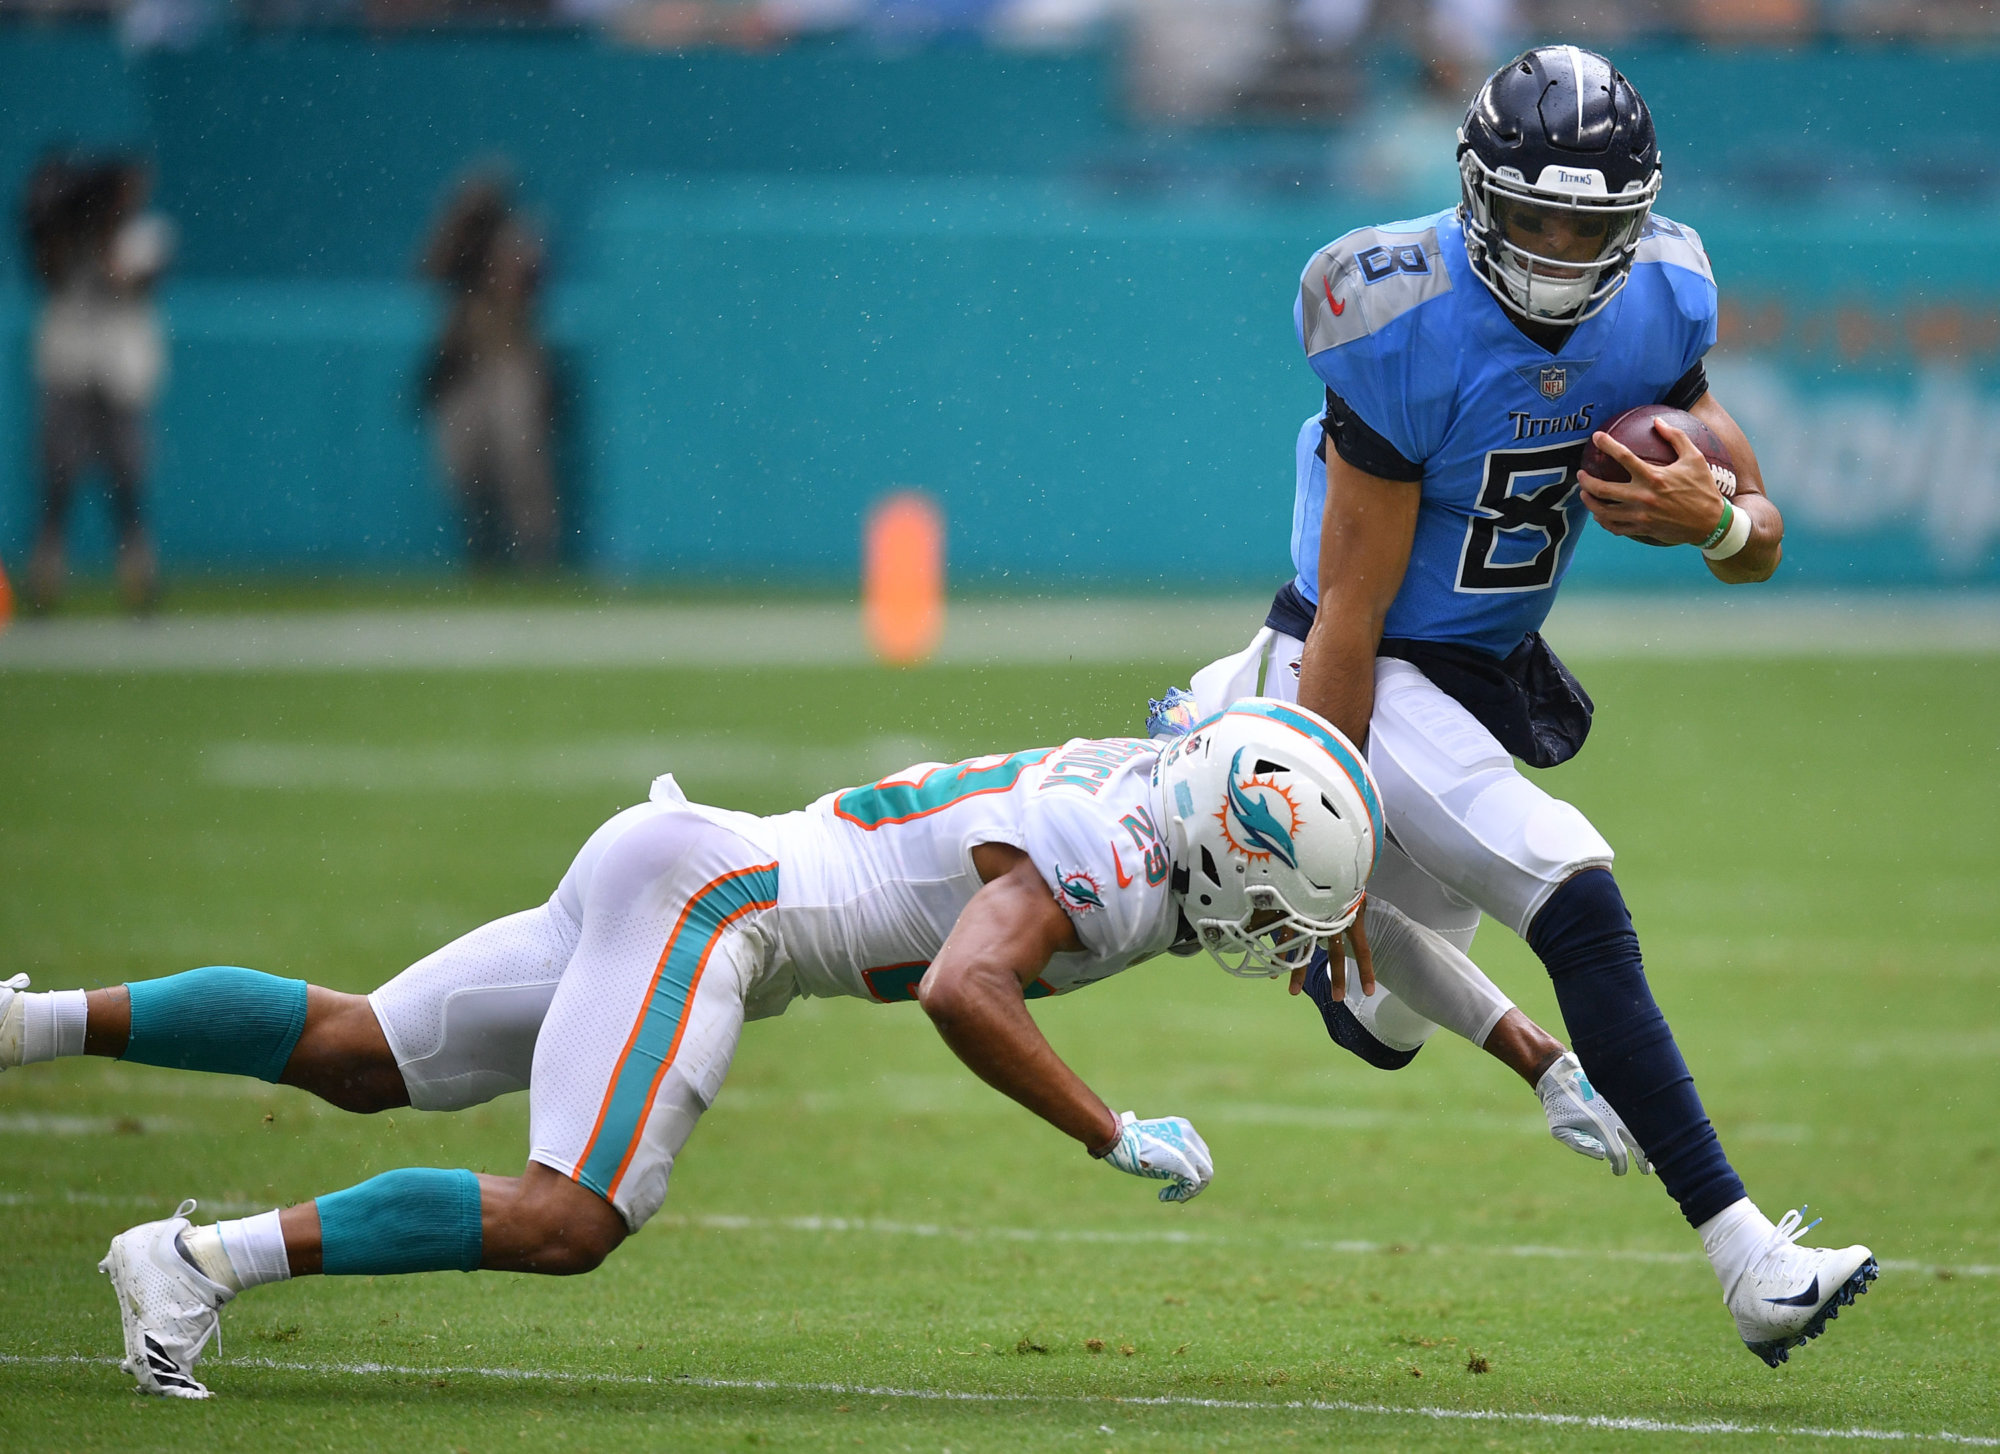 MIAMI, FL - SEPTEMBER 09: Marcus Mariota #8 of the Tennessee Titans runs with the ball in the first quarter against the Miami Dolphins at Hard Rock Stadium on September 9, 2018 in Miami, Florida. (Photo by Mark Brown/Getty Images)